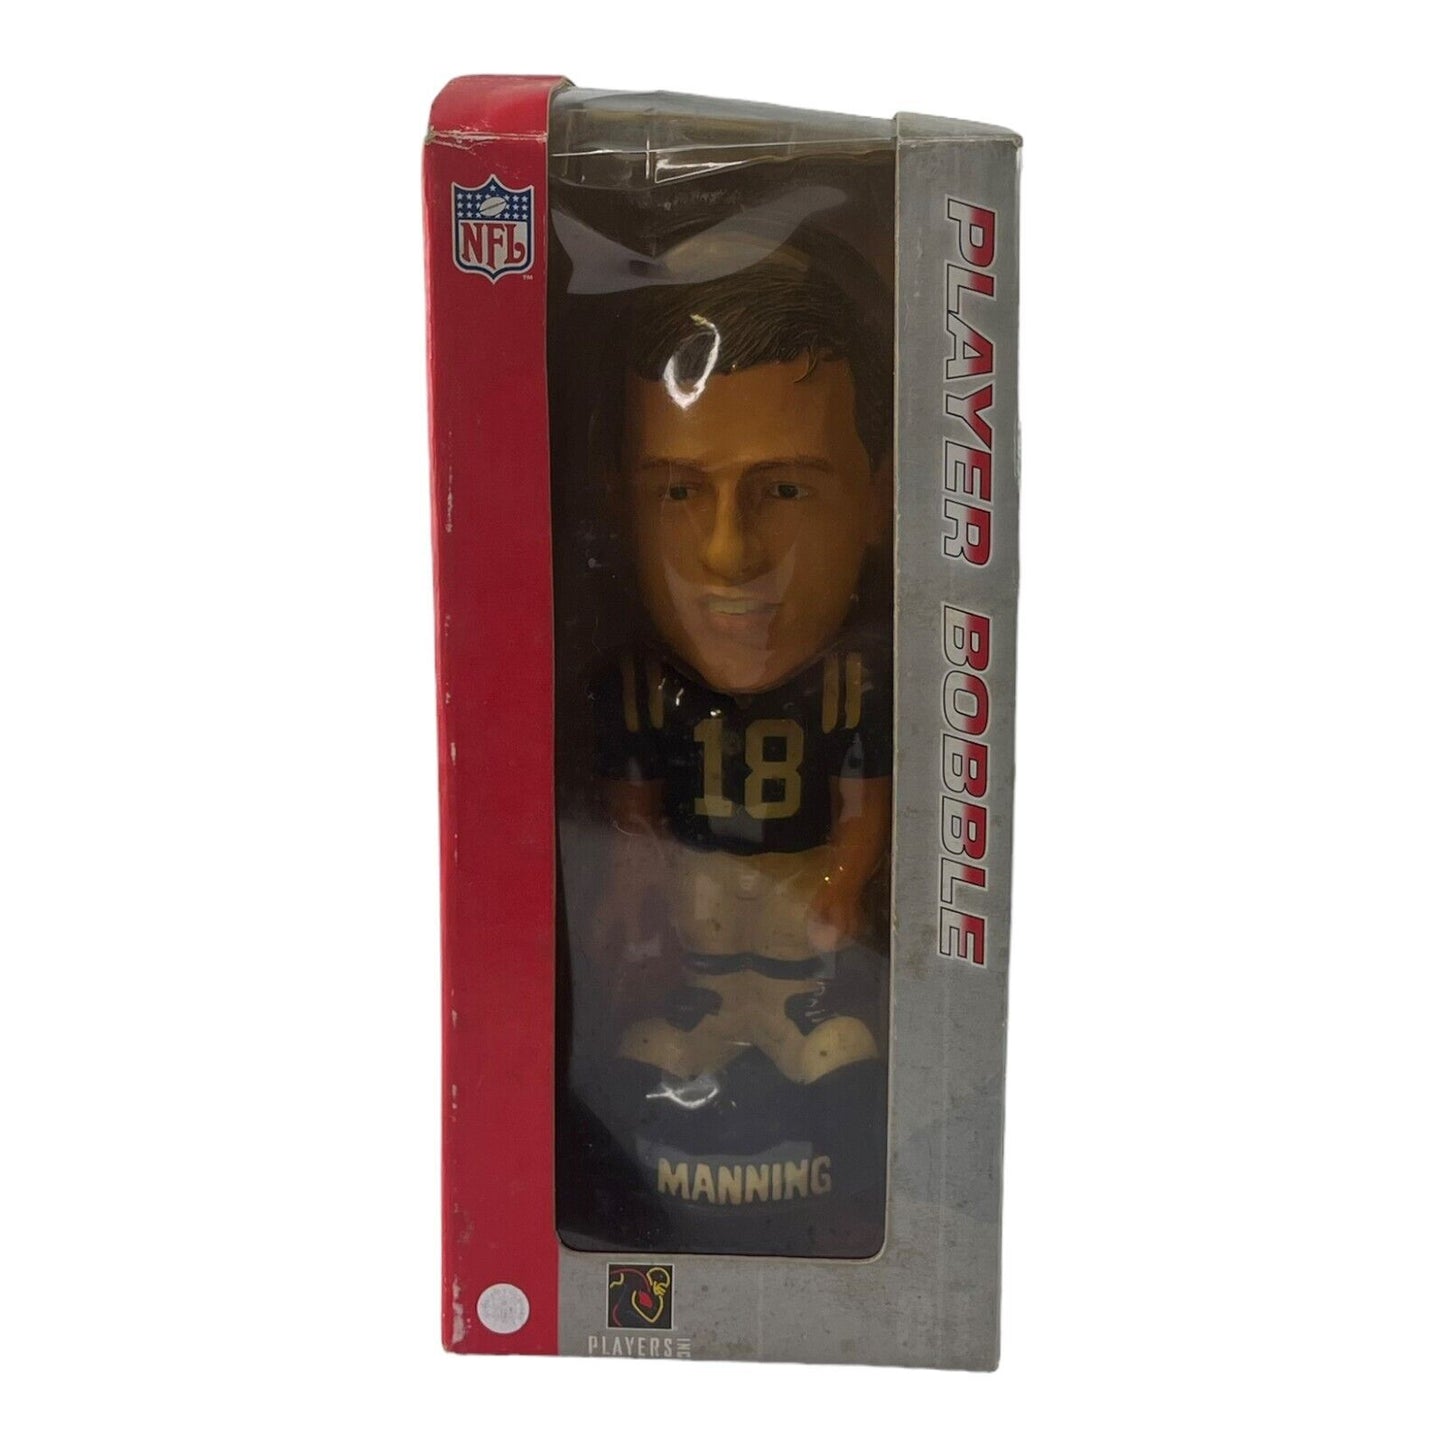 NFL Knuckle Heads Peyton Manning 7 Inch Bobble Head Indianapolis Colts